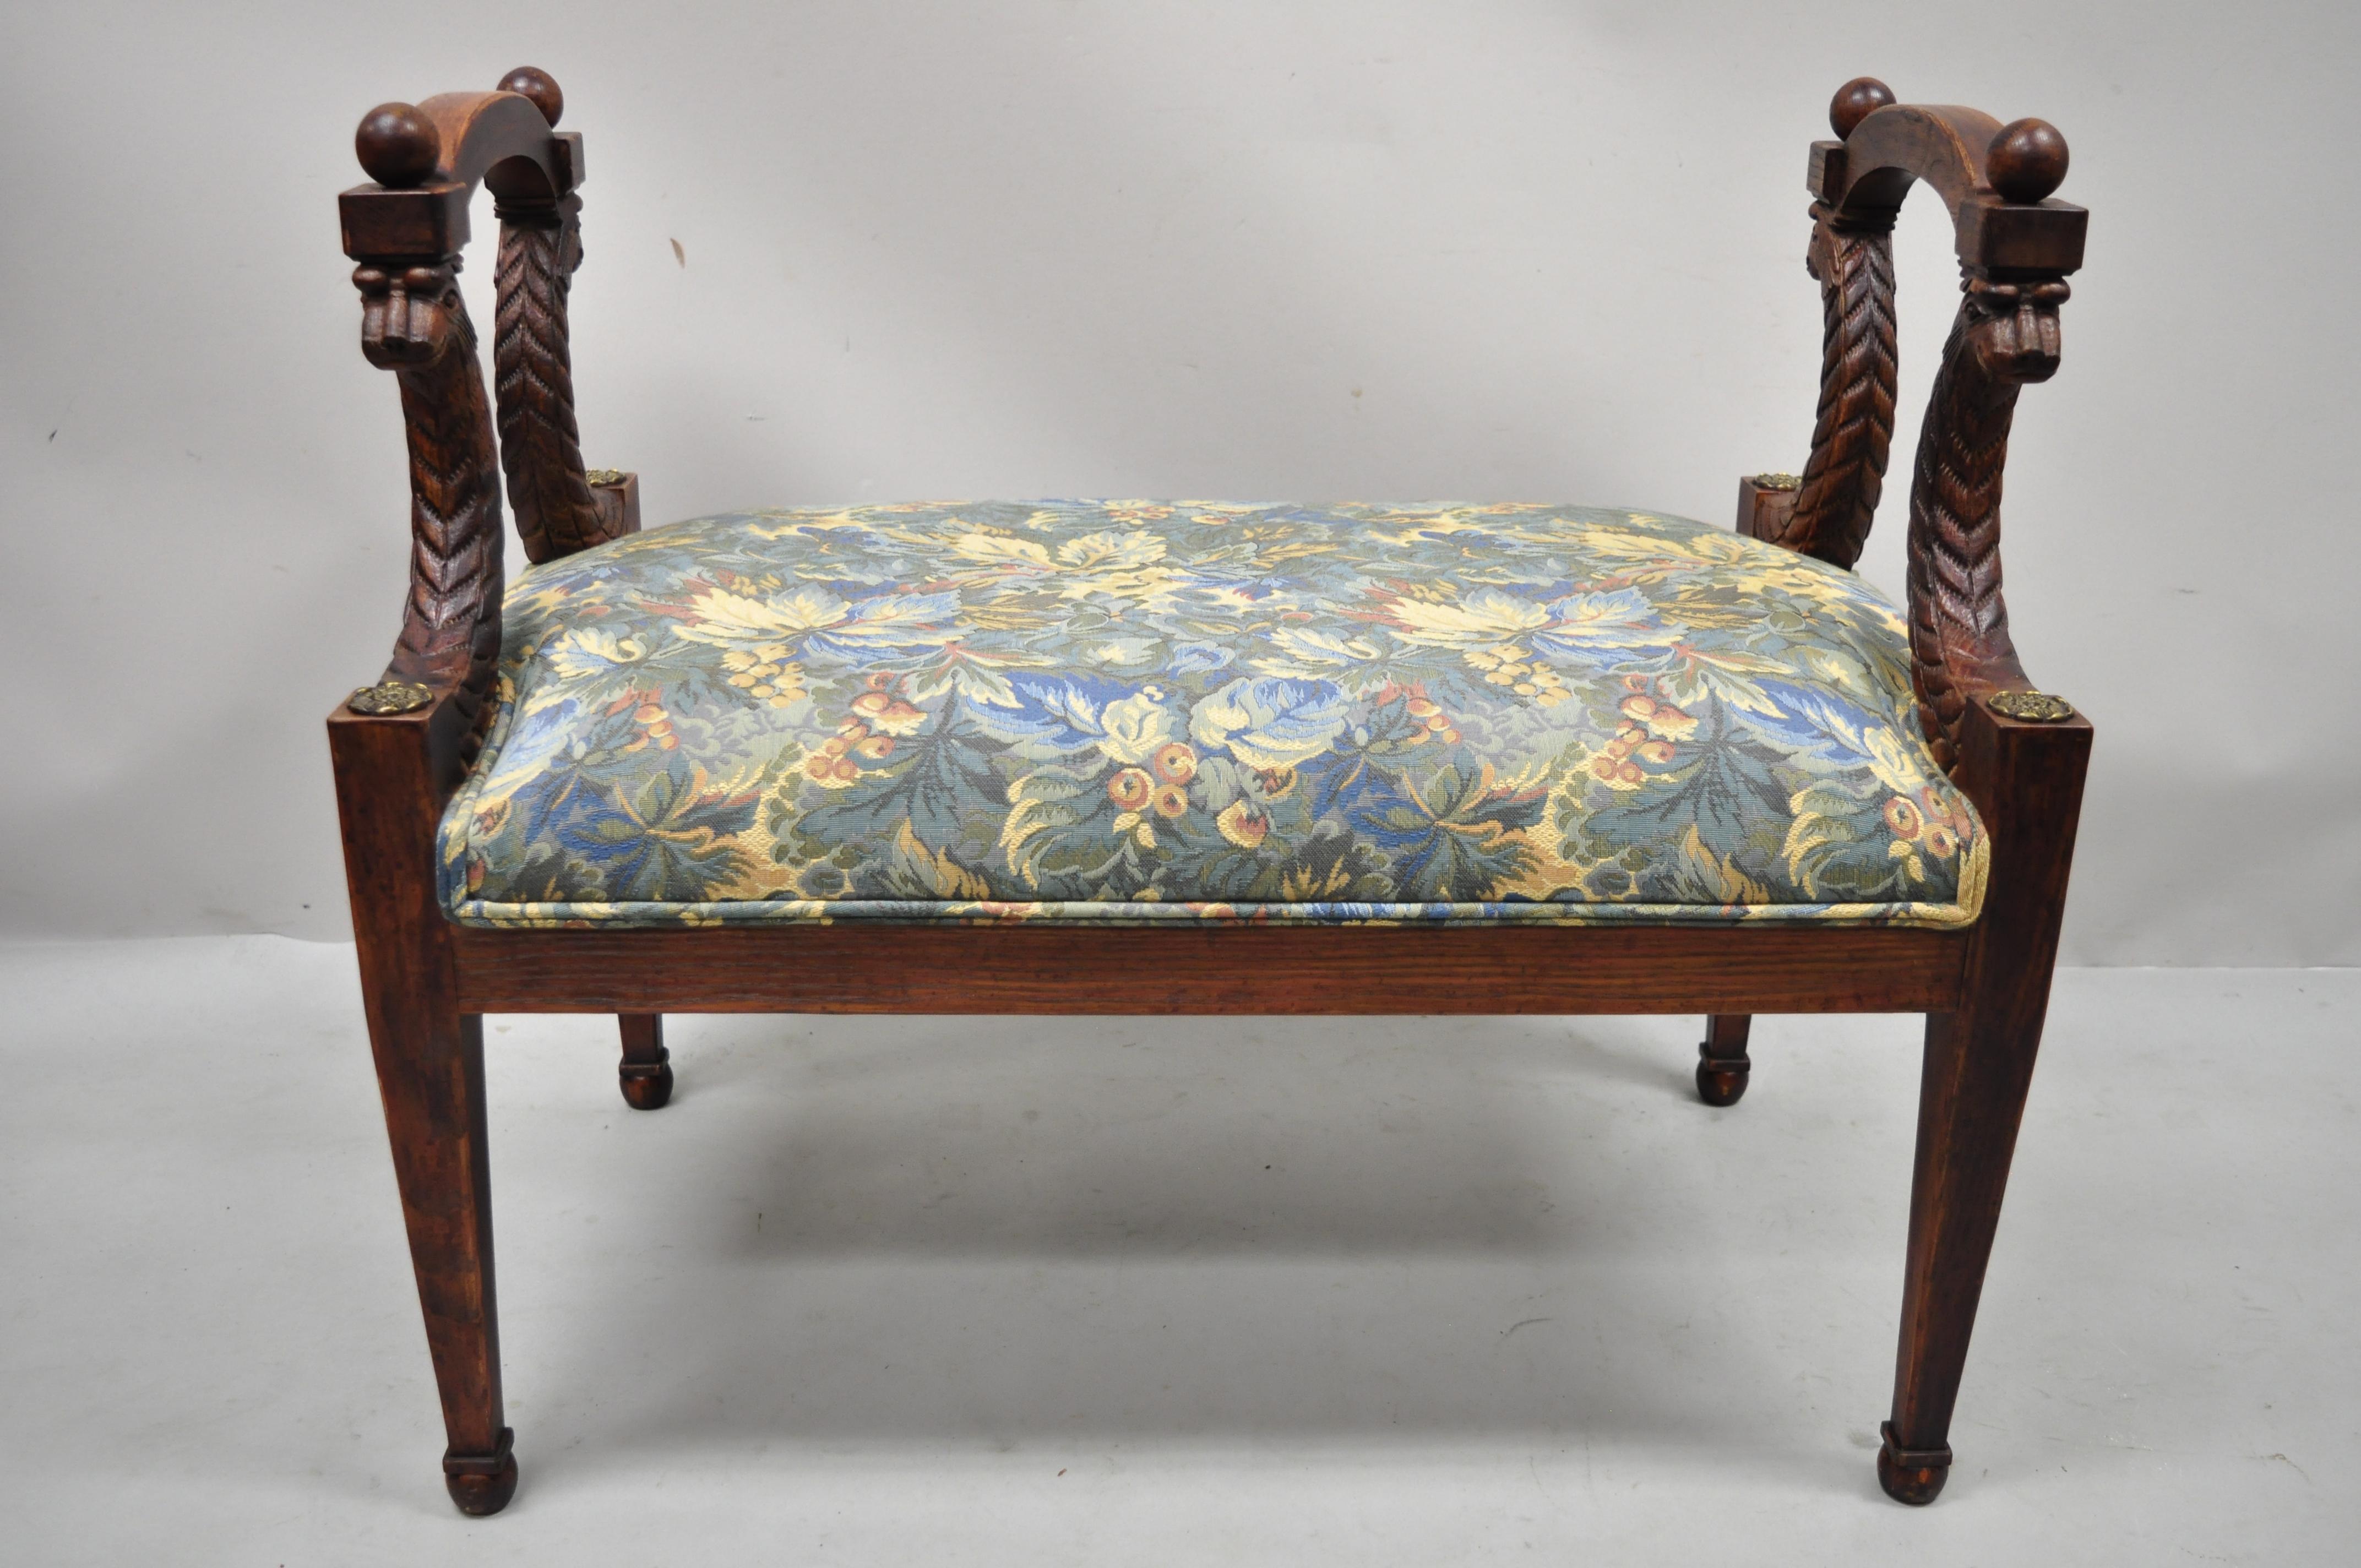 Vintage Italian Regency style figural carved floral upholstered wooden window bench. Item features faces carved to frame, solid wood frame, upholstered seat, distressed finish, nicely carved details, tapered legs, very nice vintage item, great style